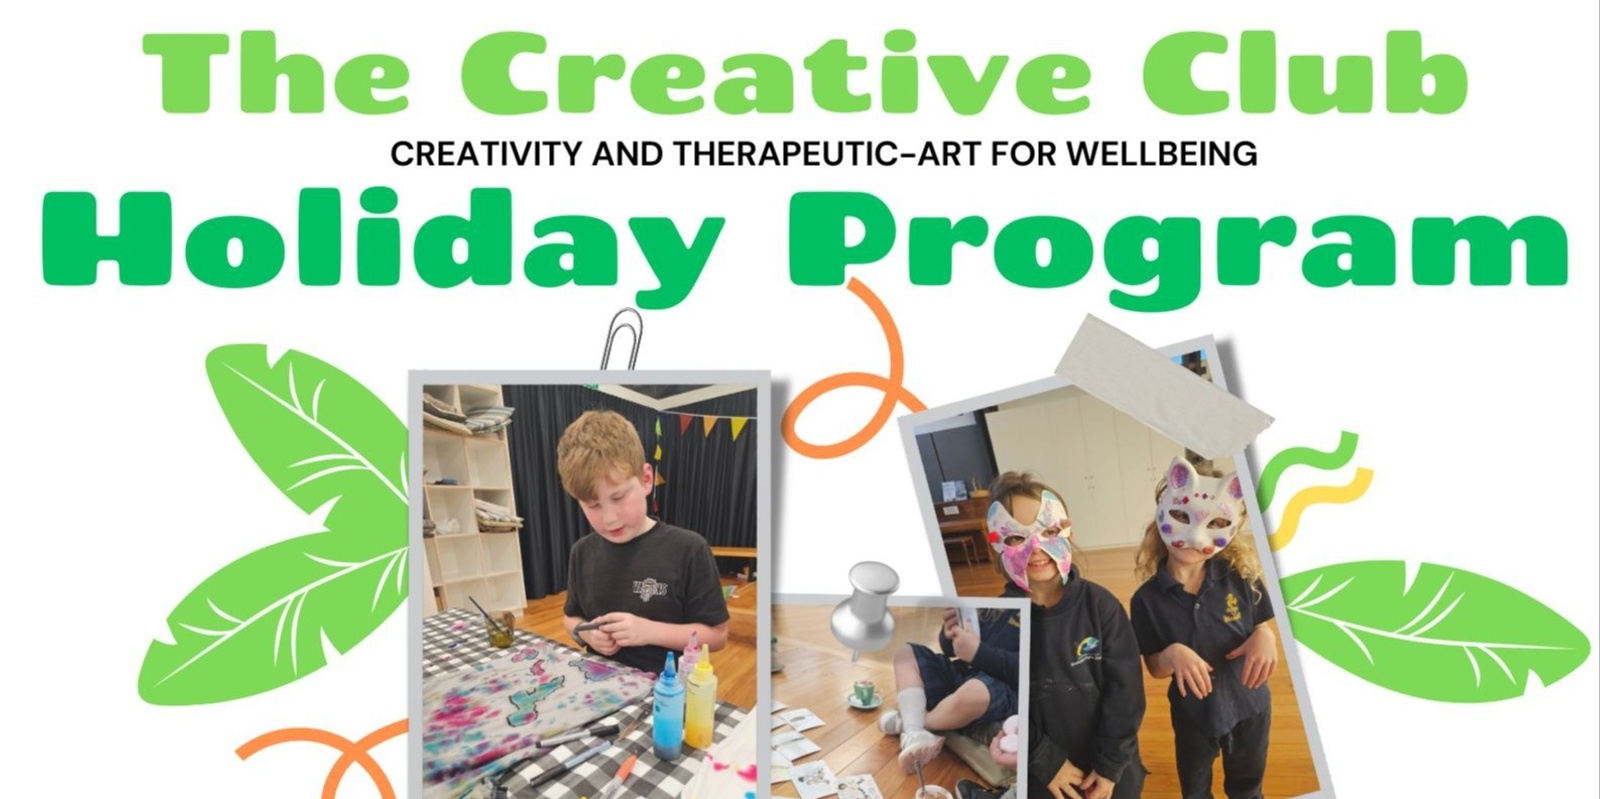 Banner image for The Creative Club Holiday Program 